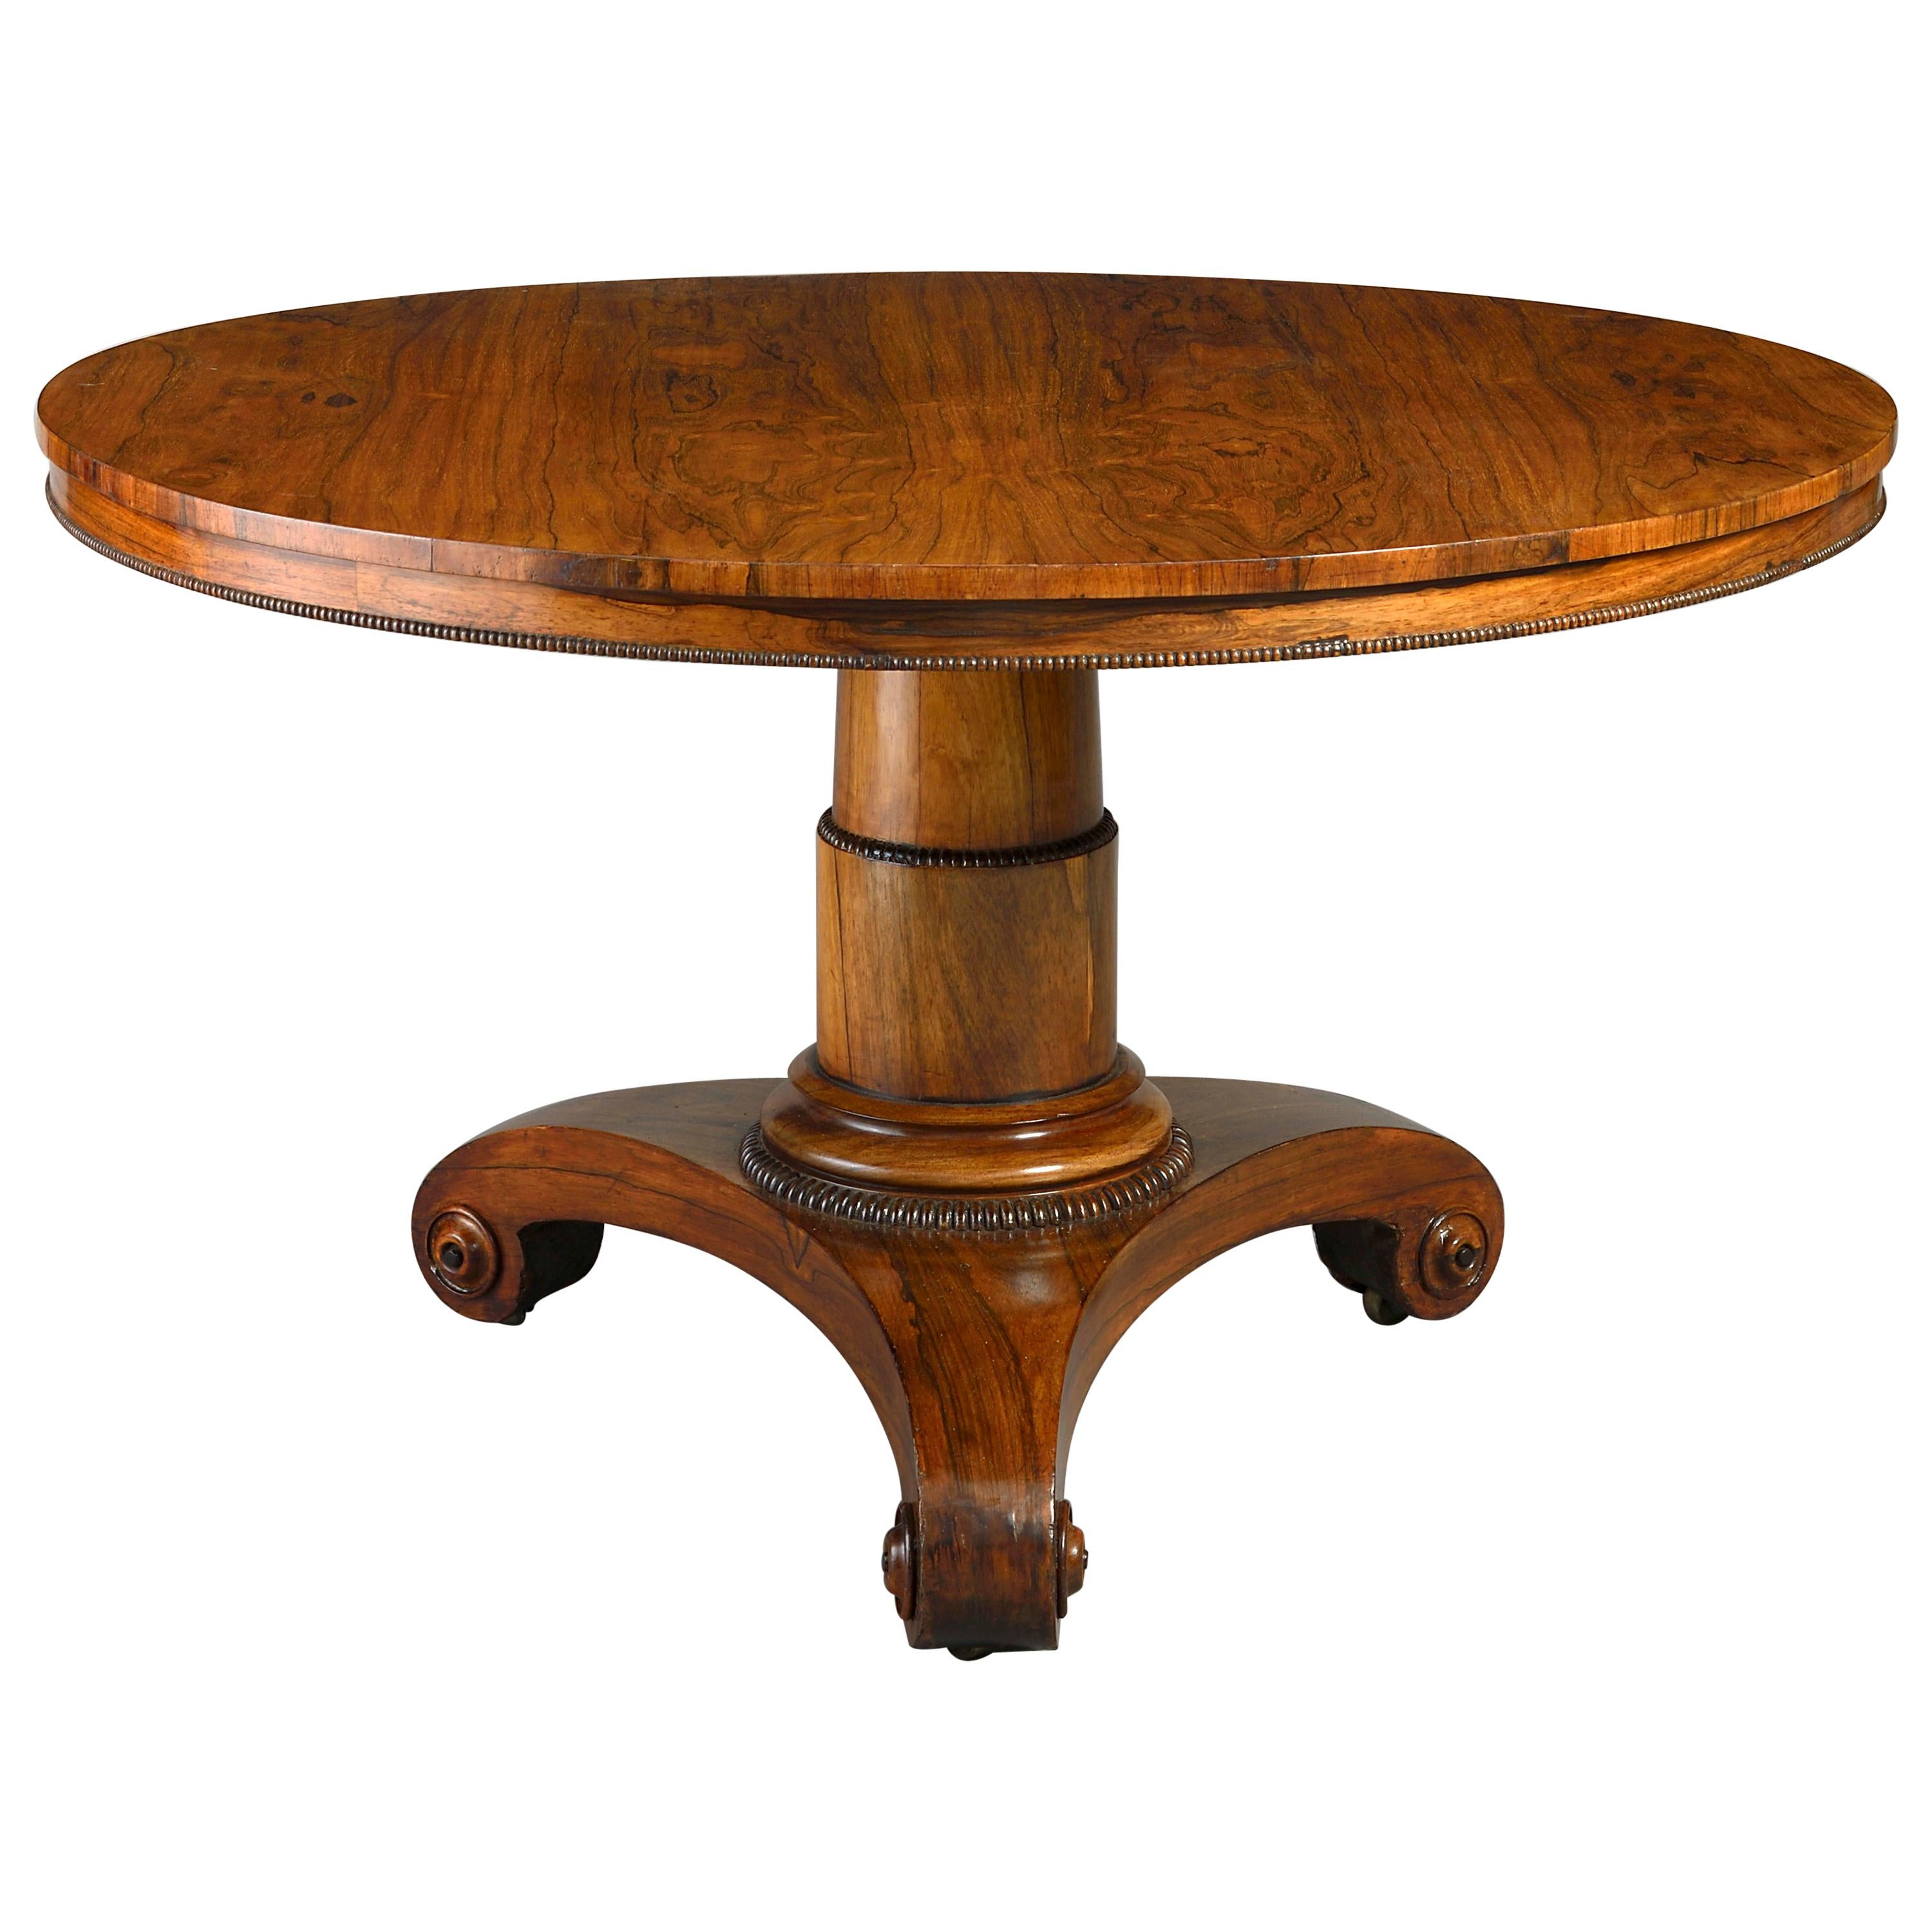 Early 19th Century Regency Period Rosewood Centre Table